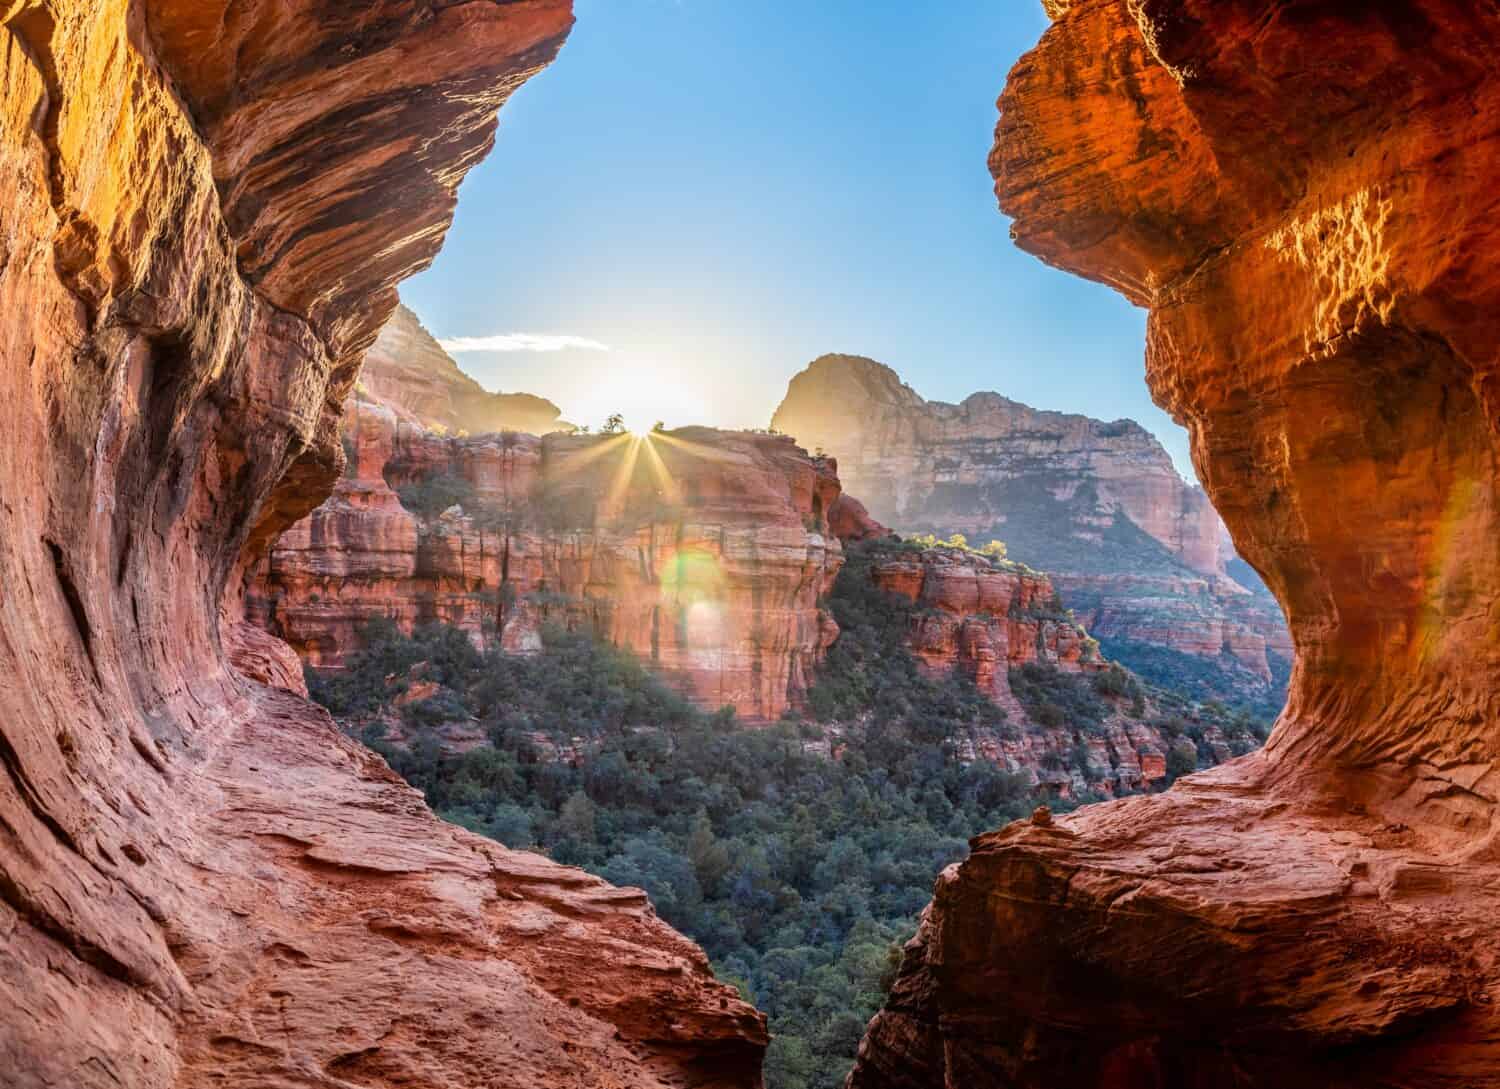 A view from the secret subway cave in boyton canyon in Sedona. This may one once been a secret location but it is now one of the premier hiking destinations in Sedona.